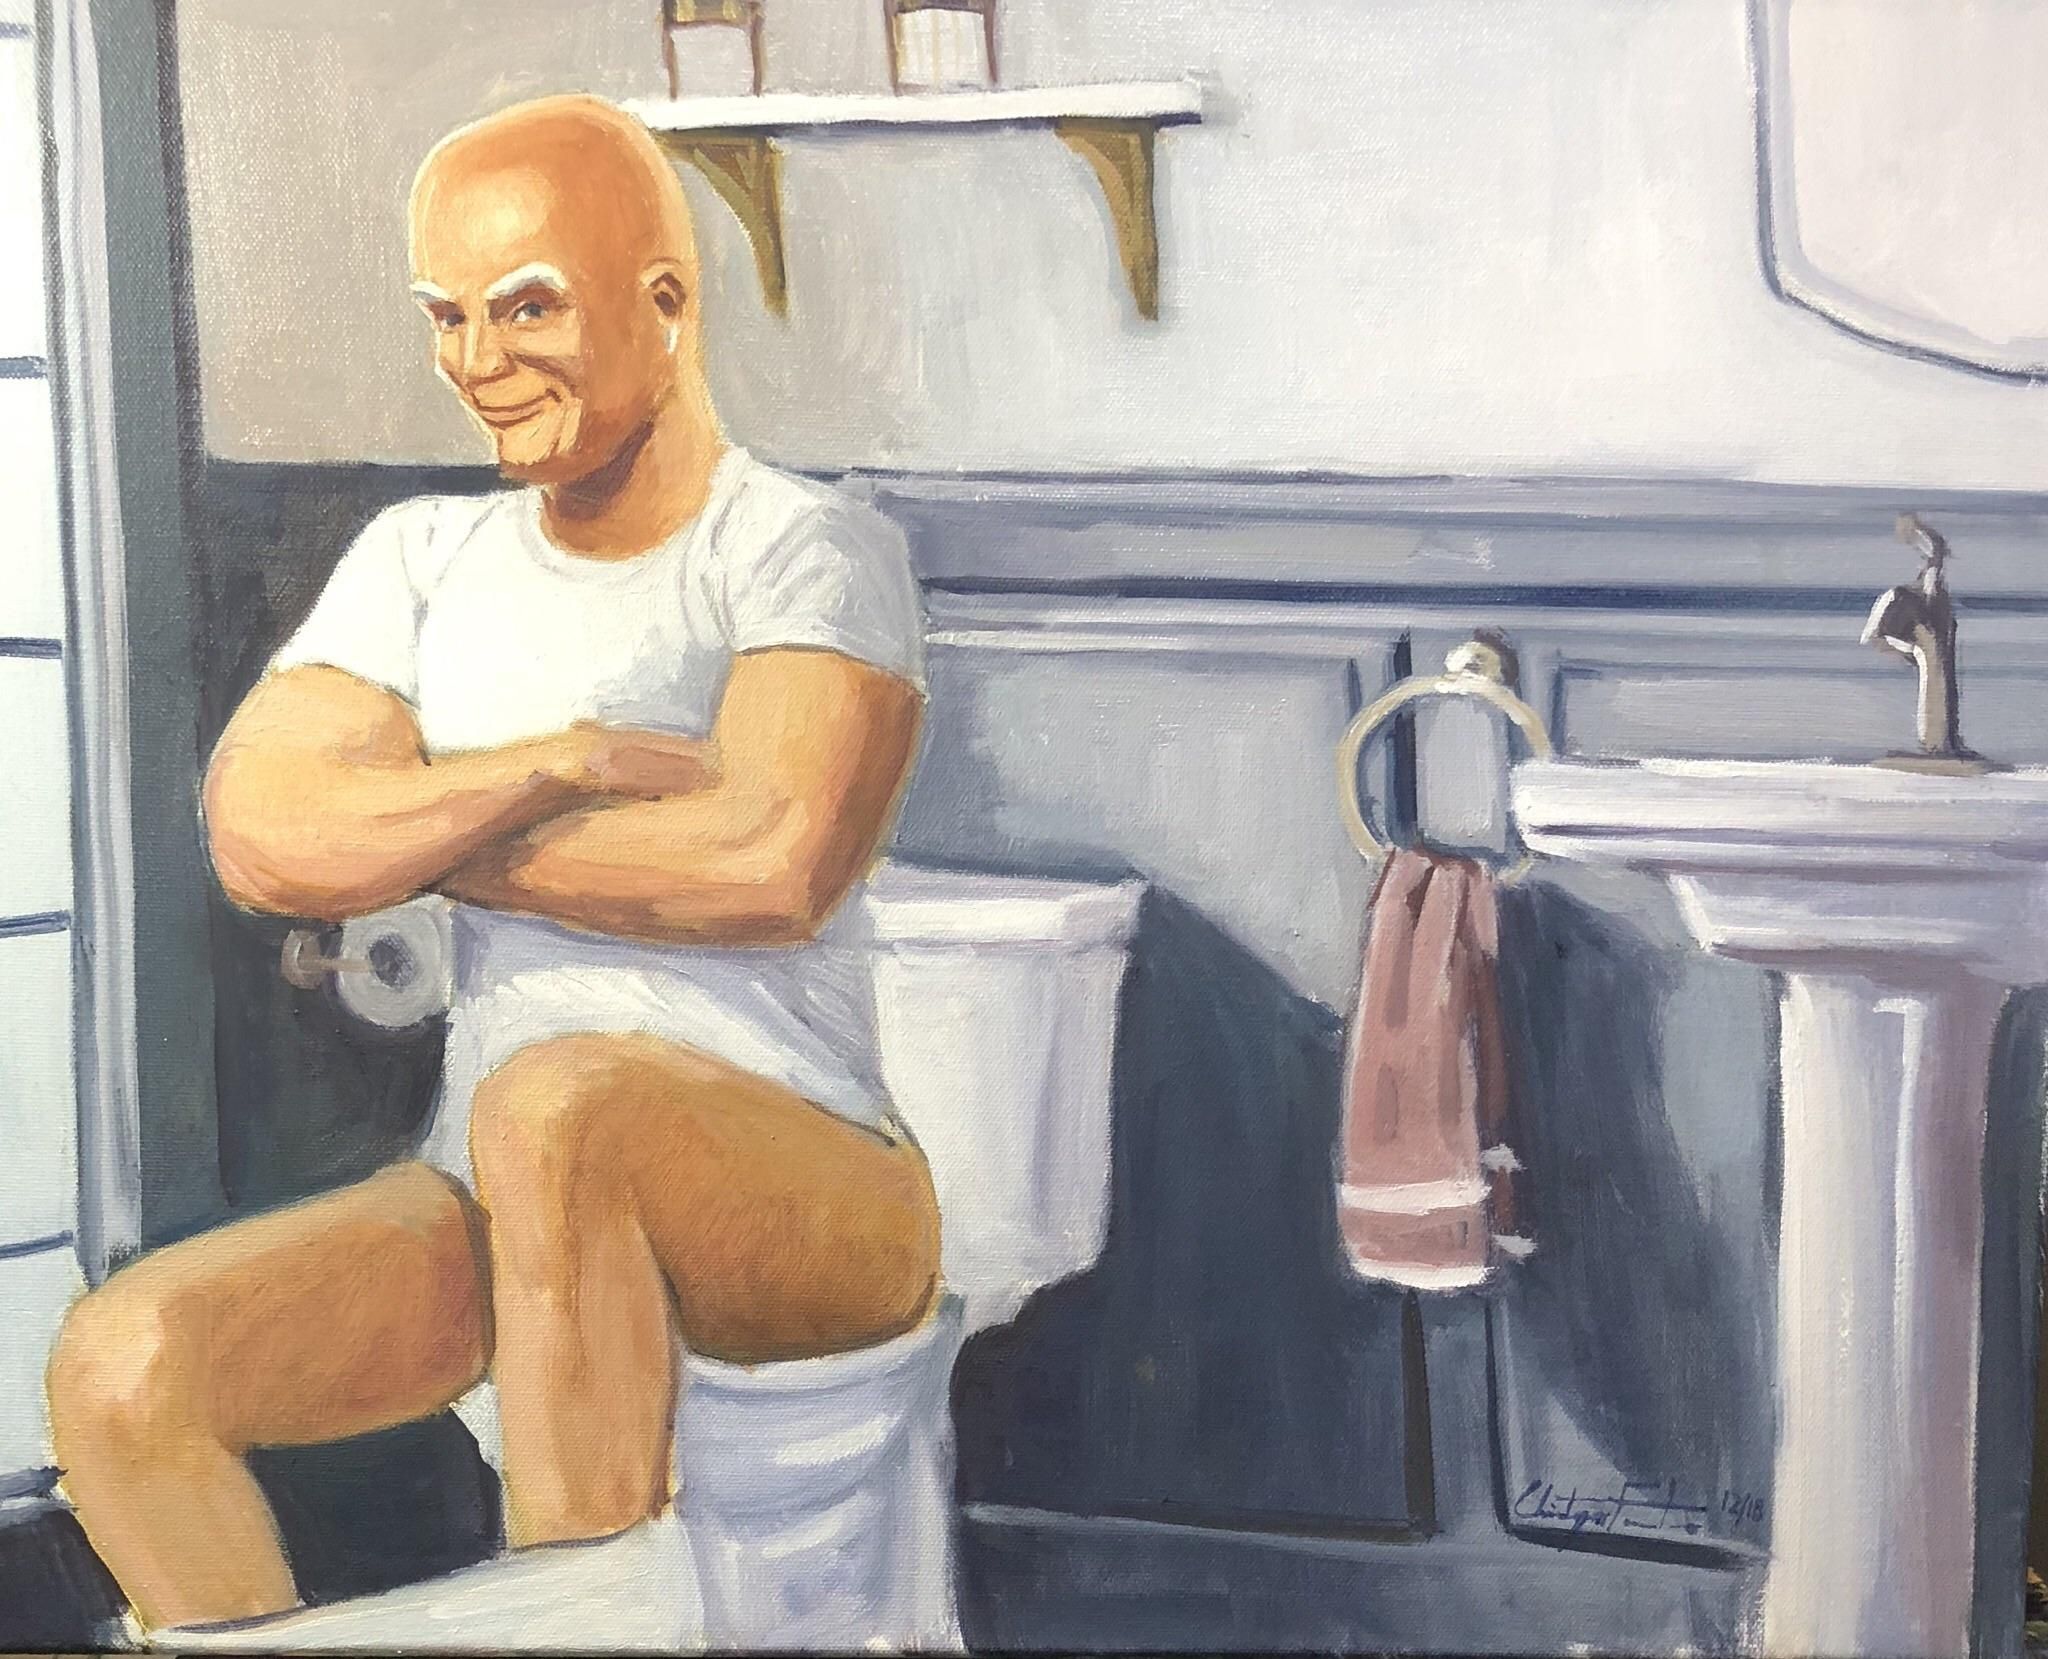 My latest client commissioned a painting of Mr. Clean taking a dump. 